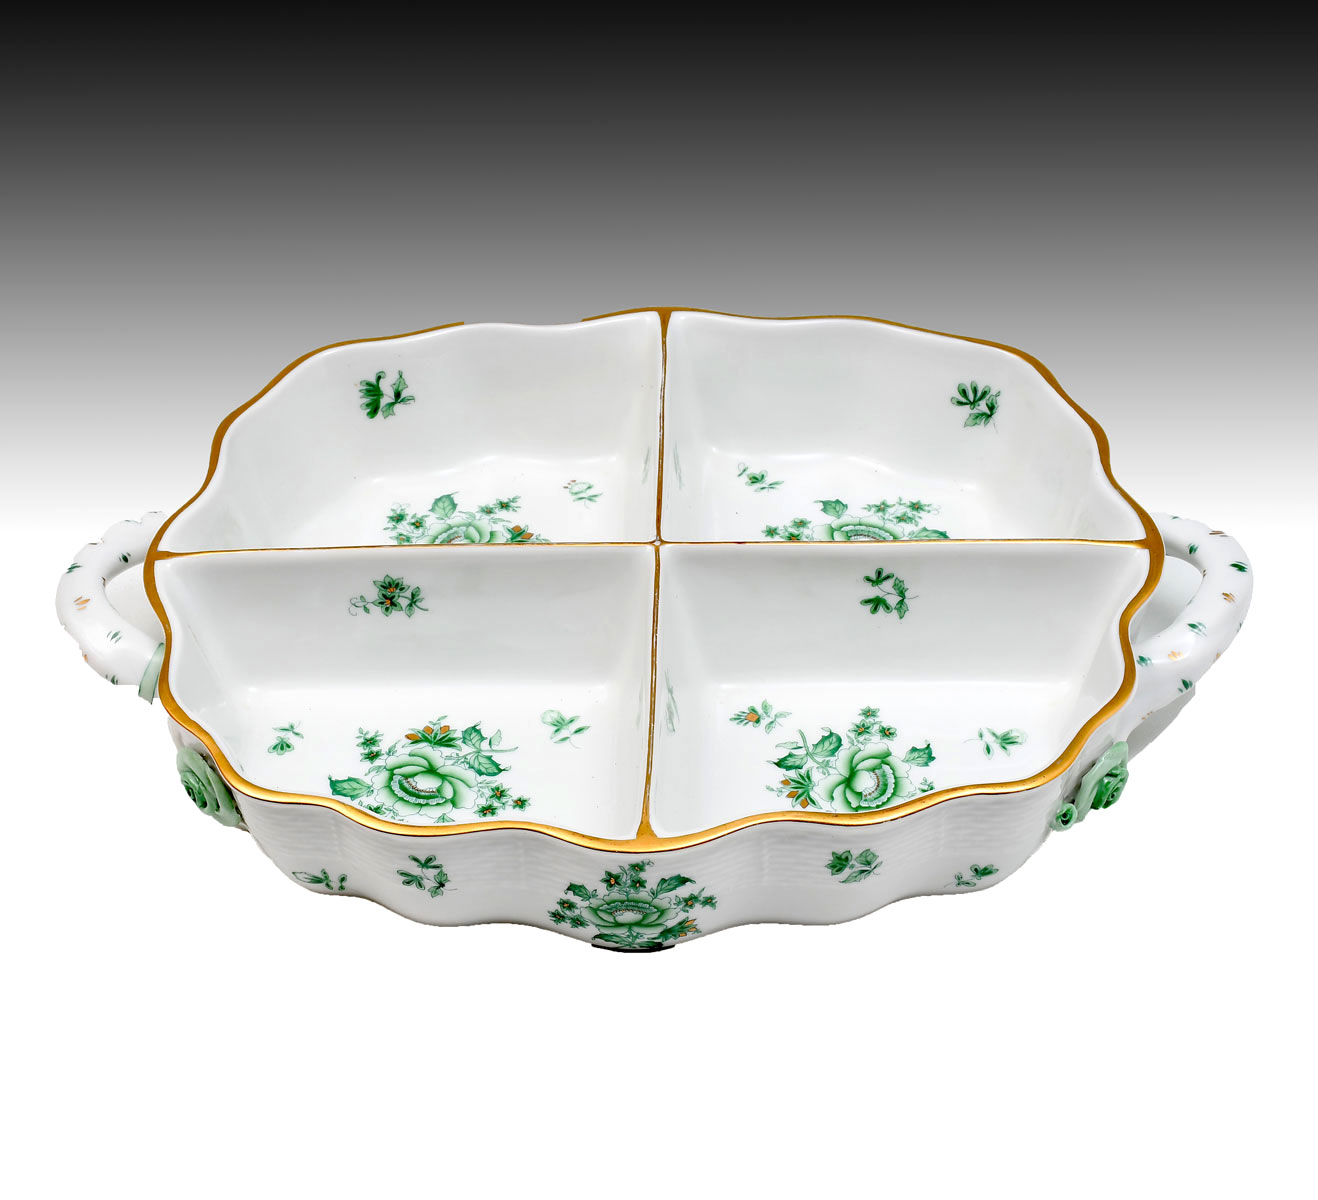 HEREND SERVING TRAY: Handled Herend